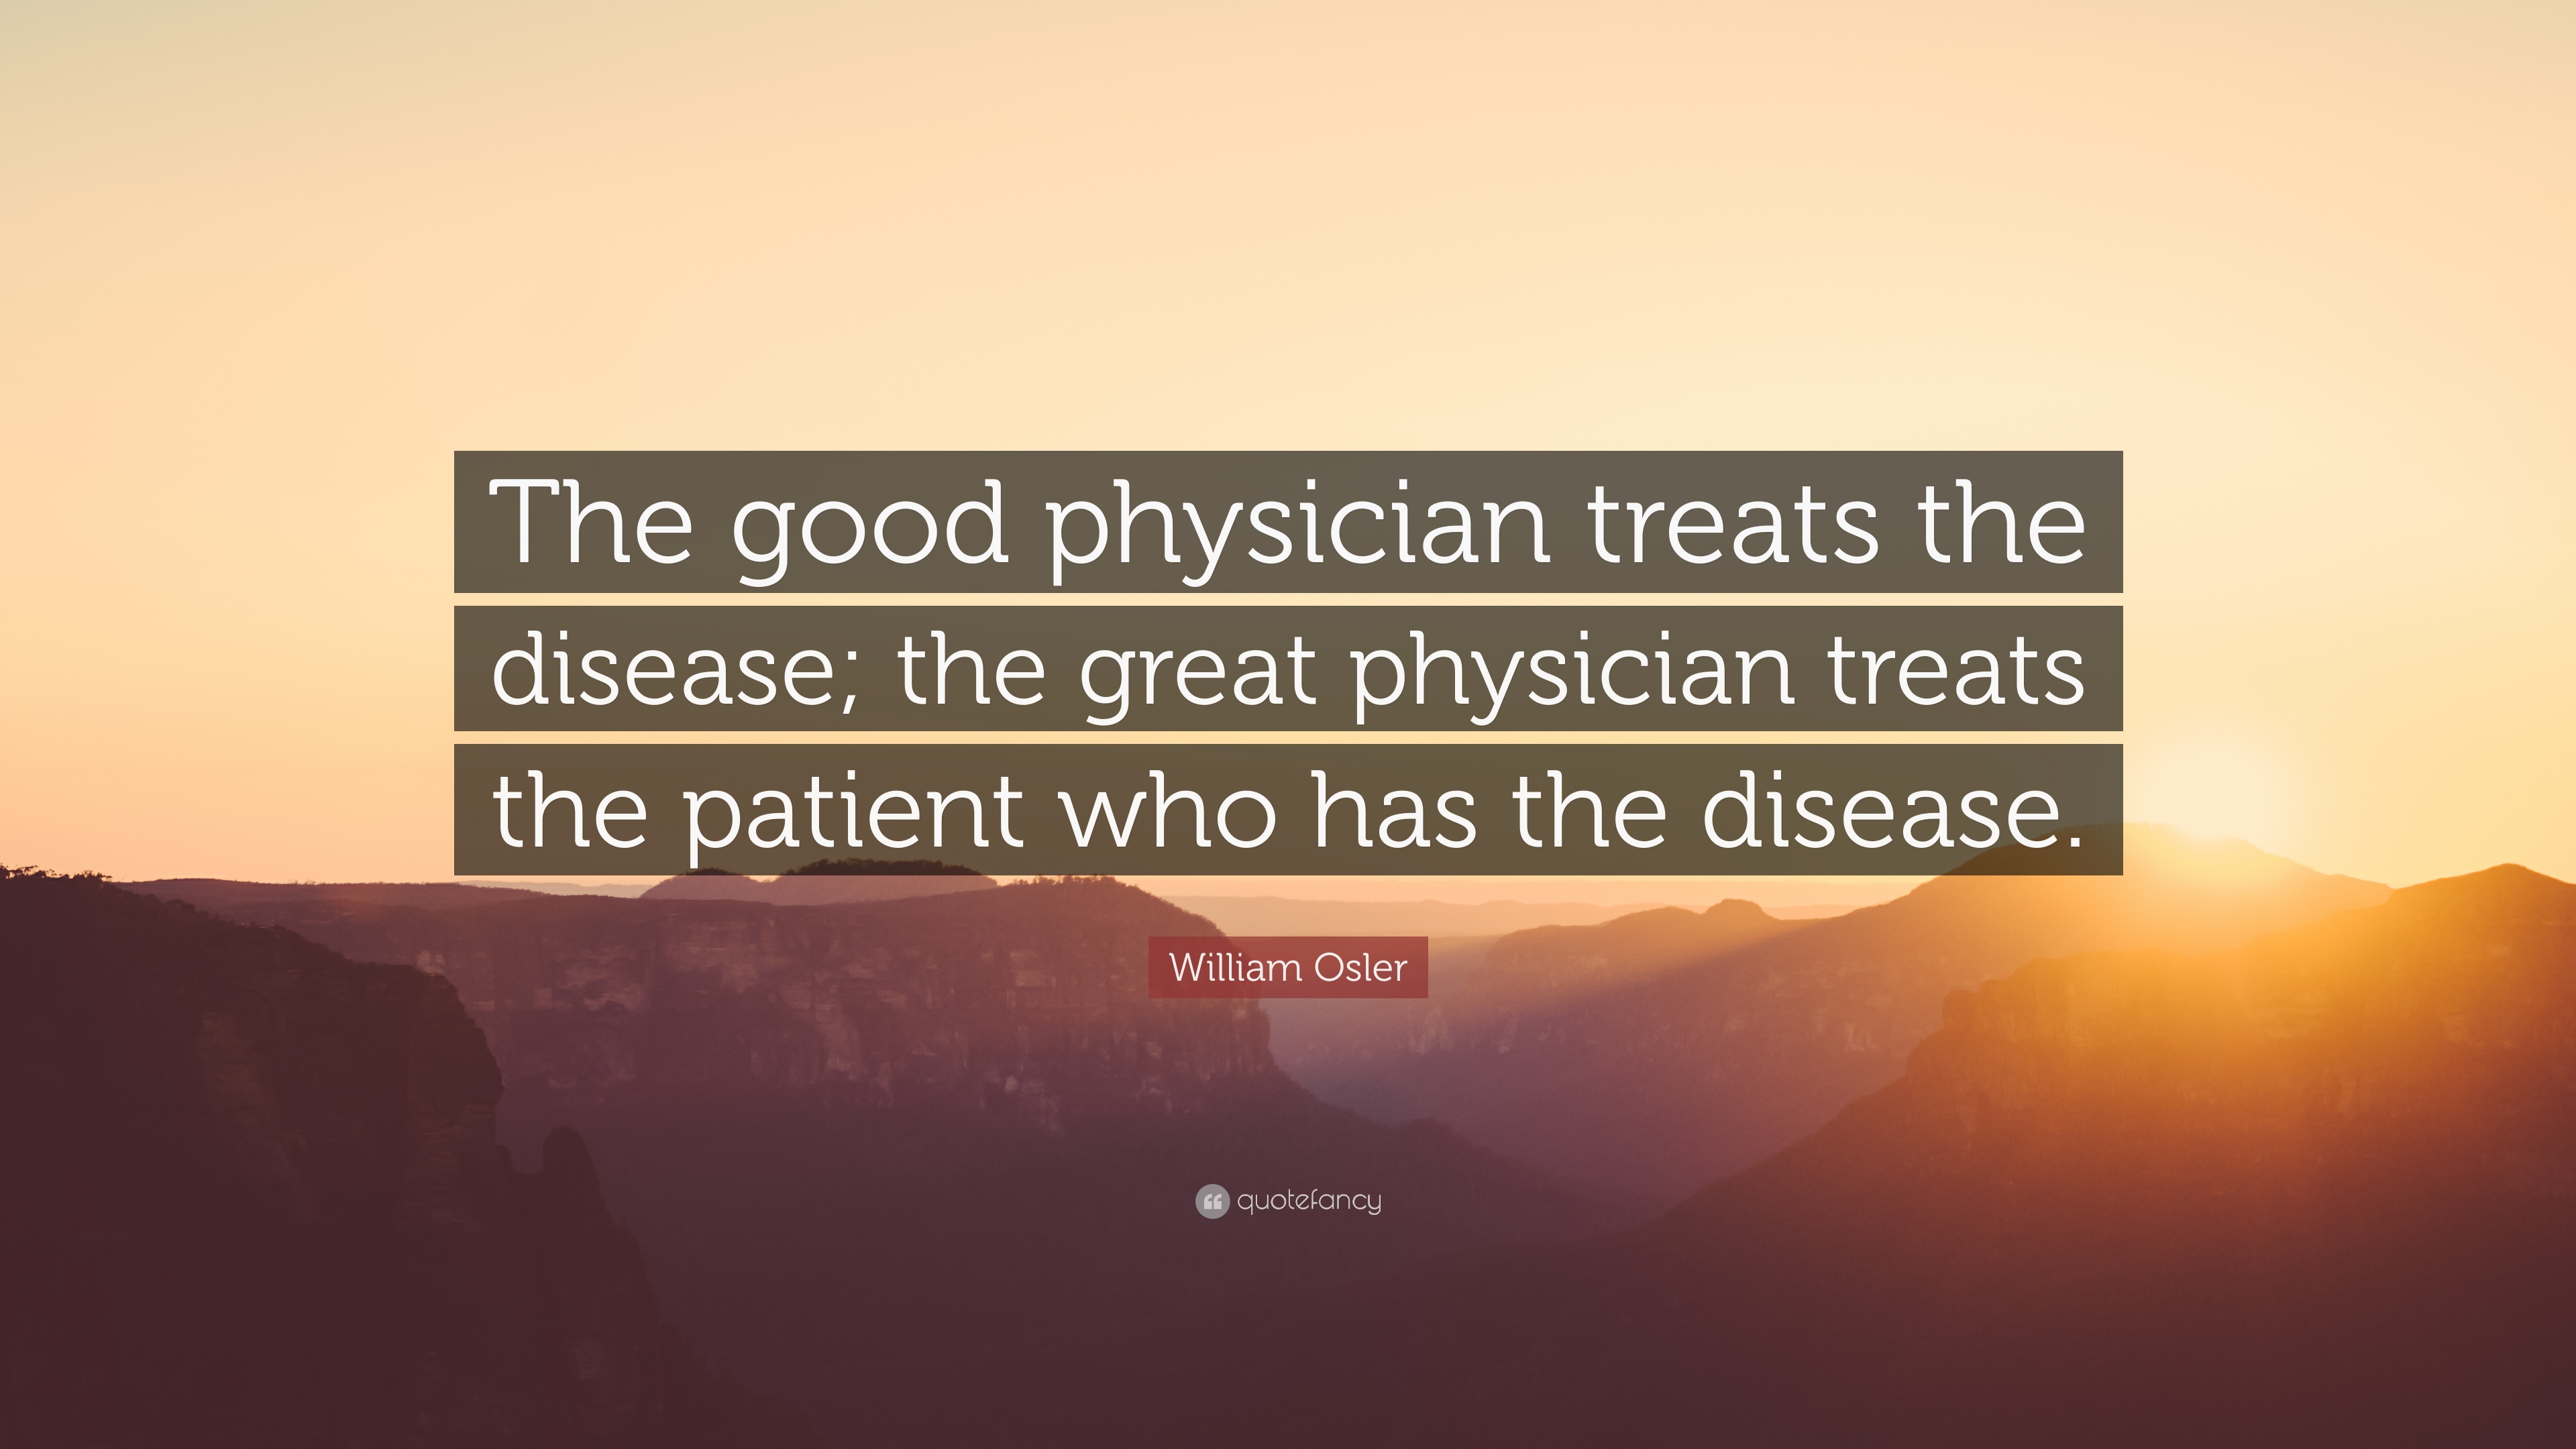 the good physician treats the disease the great physician treats the patient who has the disease. william osler